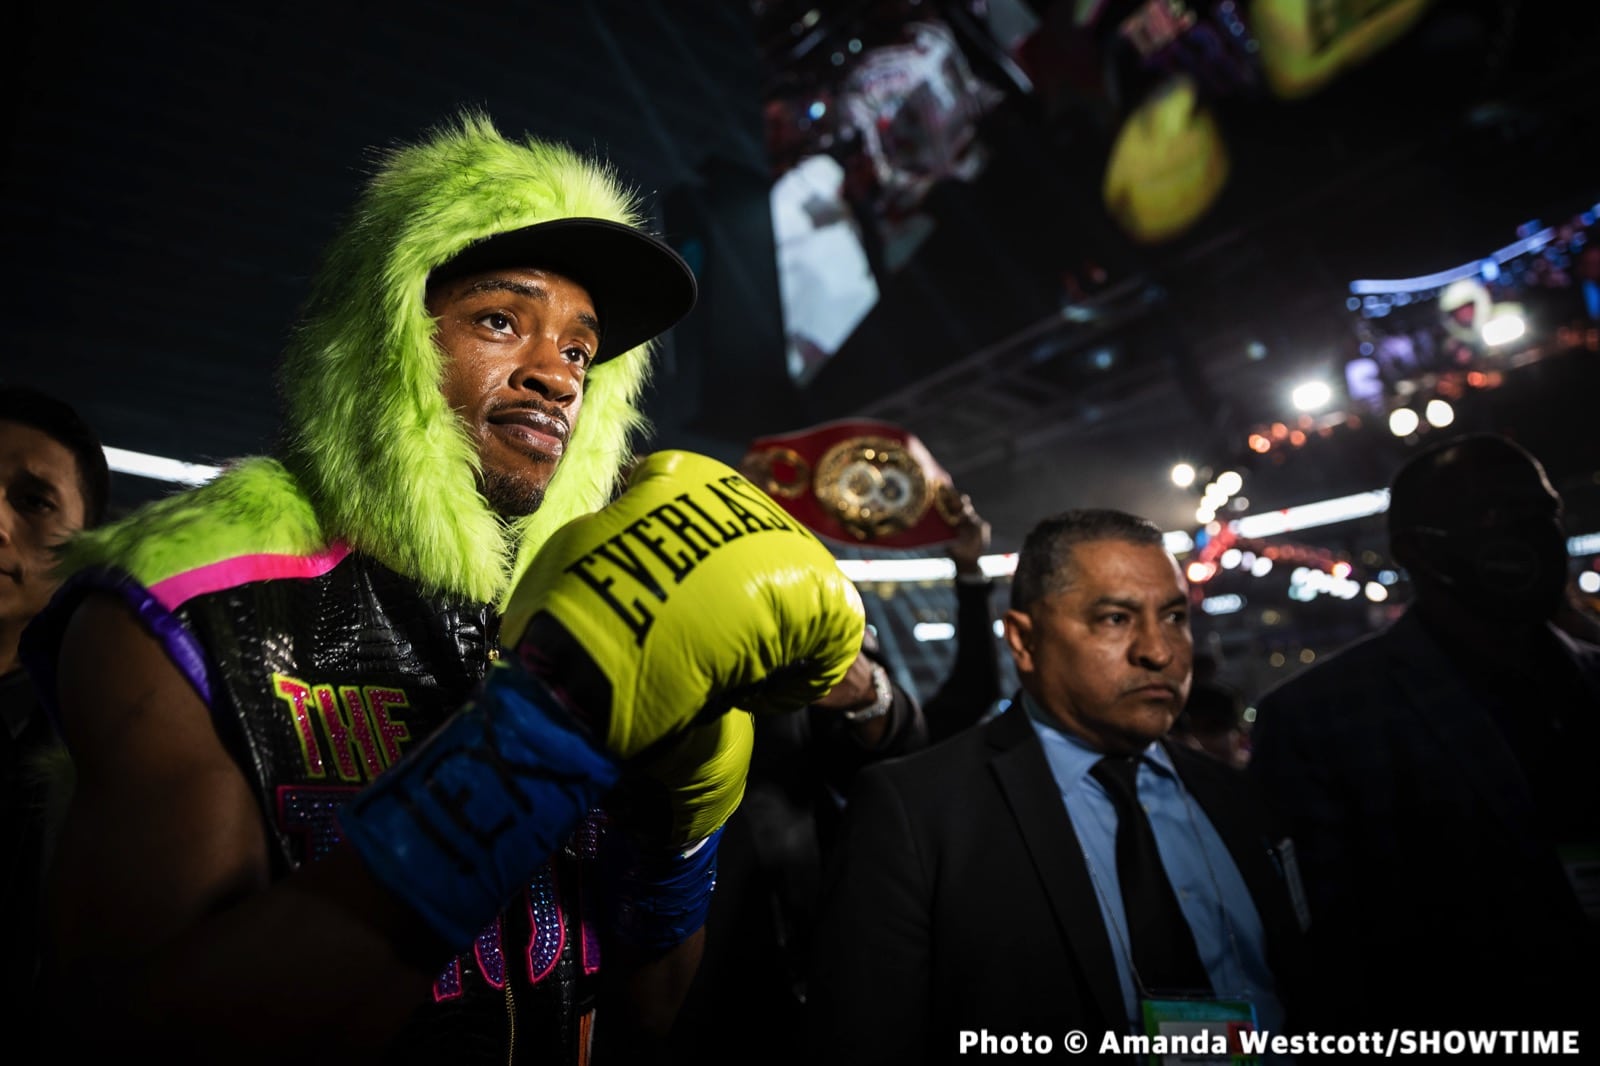 Image: Errol Spence Jr needs to fight someone good in April